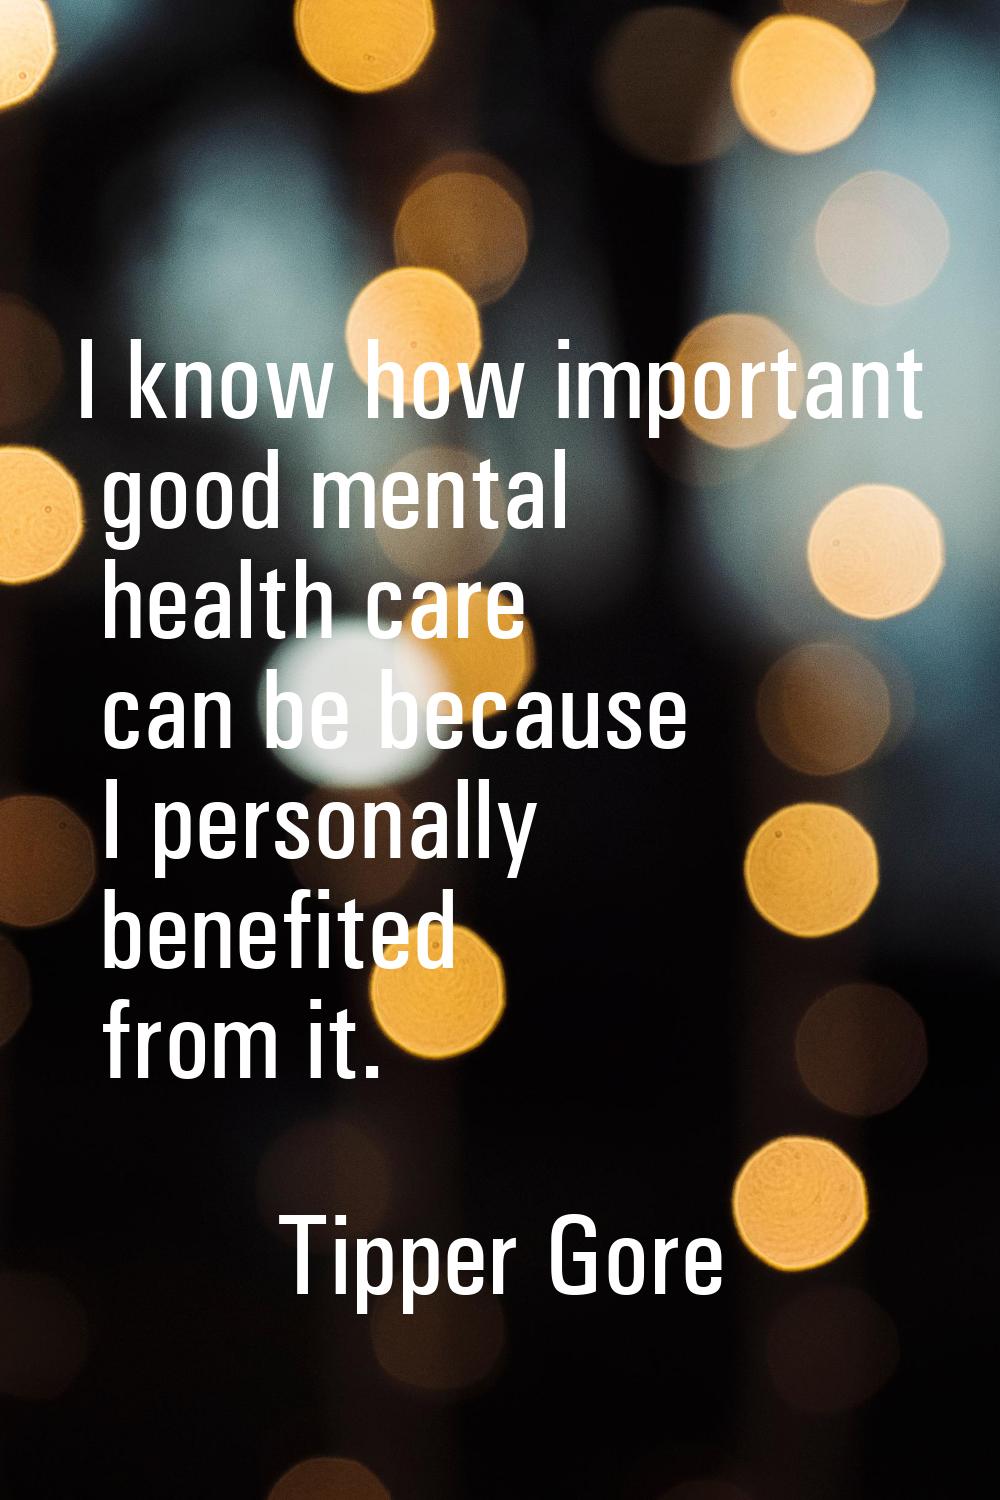 I know how important good mental health care can be because I personally benefited from it.